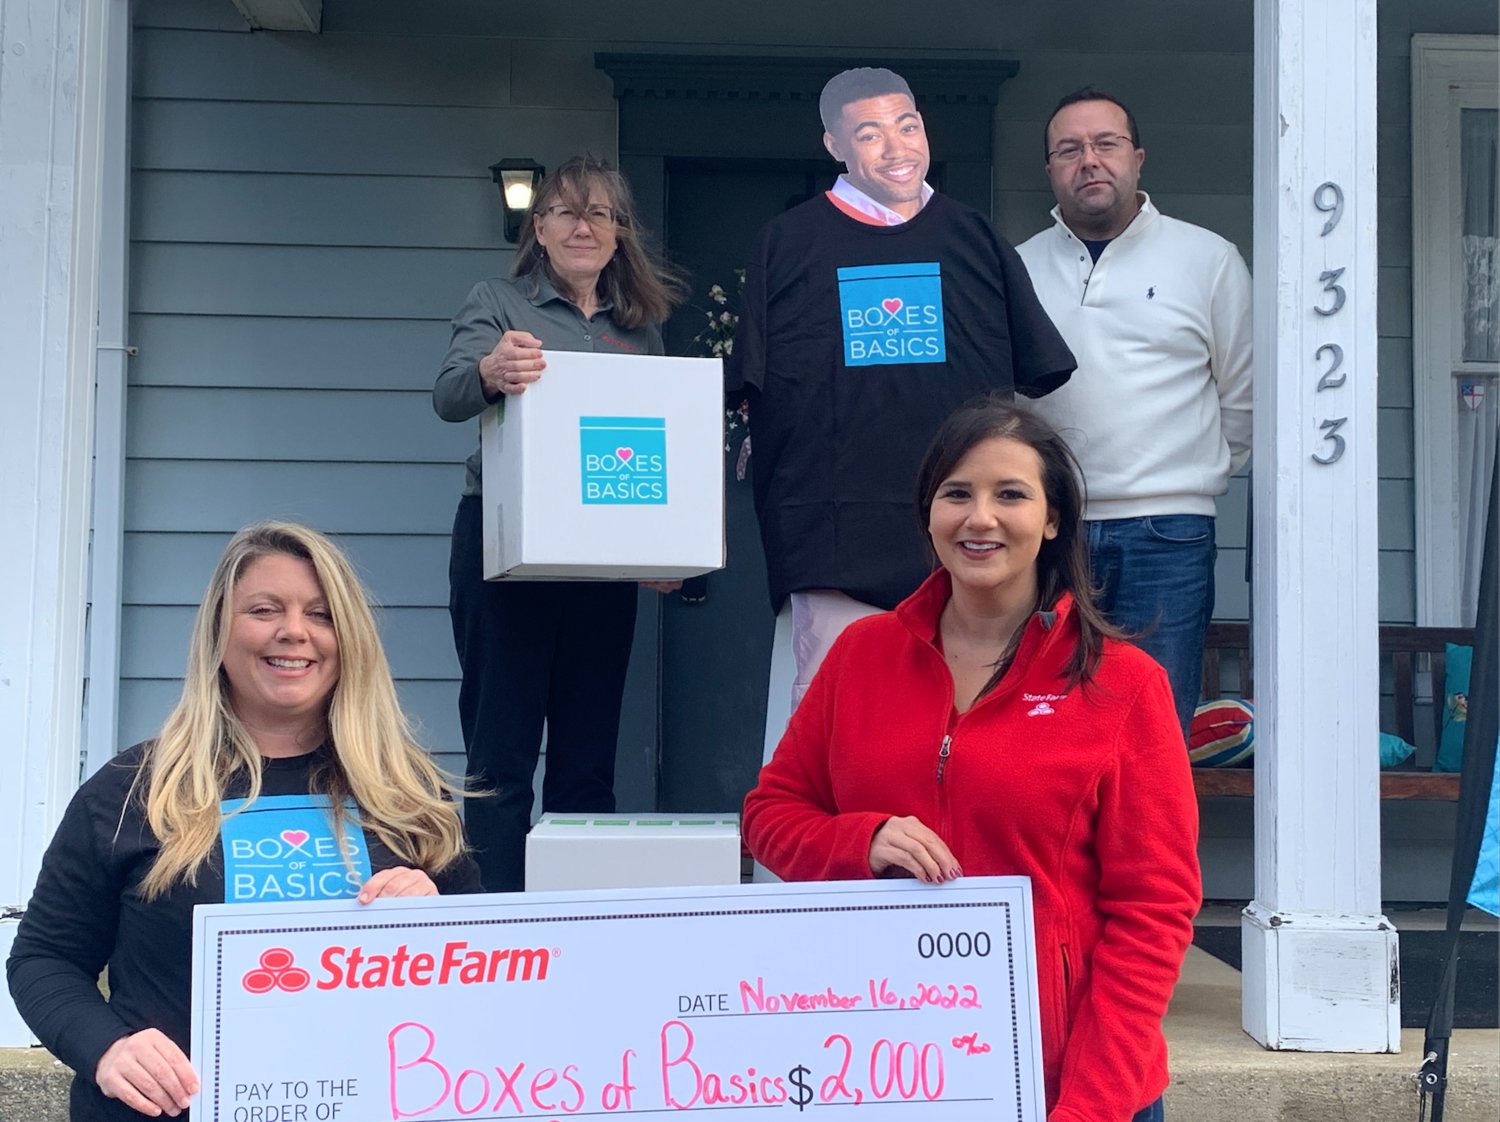 Jake of State Farm presents Boxes of Basics with a $2,000 check. Sarah Tyndall (front left) and Anita Sadlack (front right) with Sally Leigh of State Farm and Mike of Boxes of Basics.